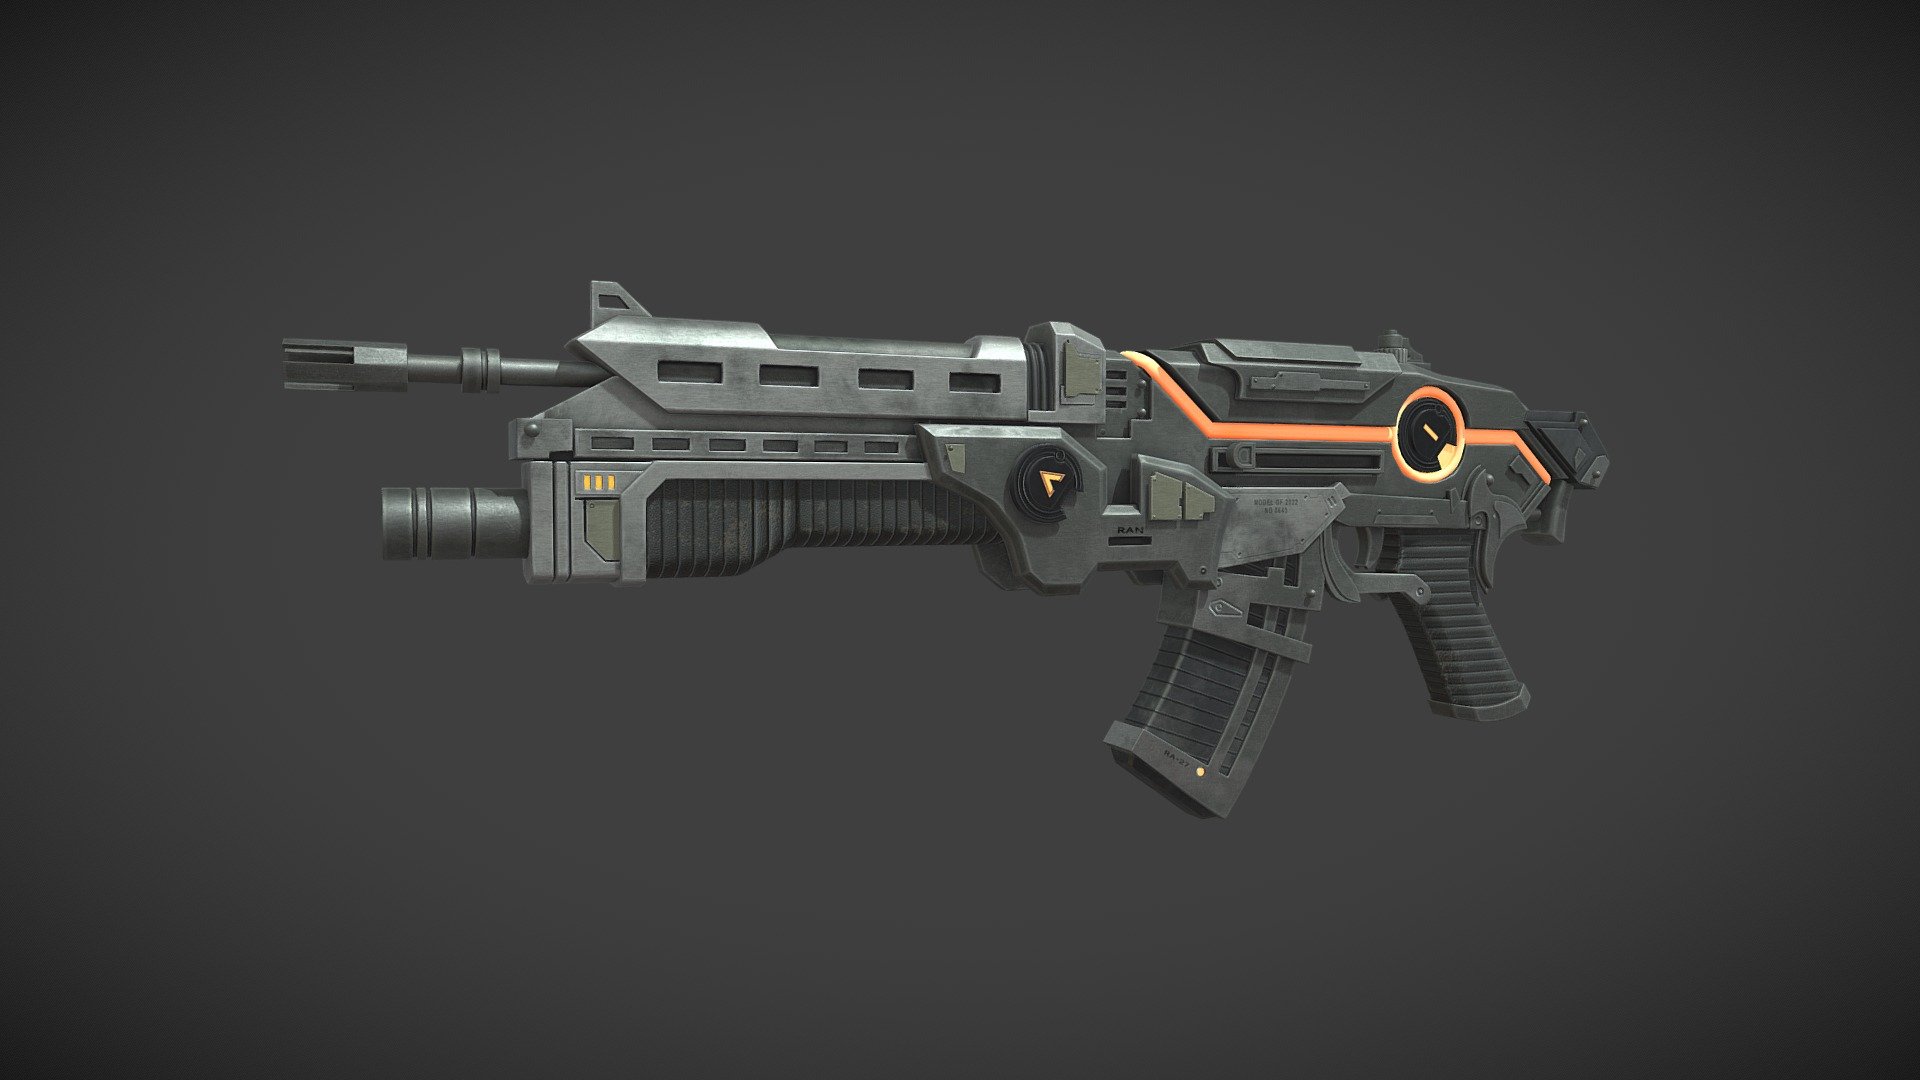 Scifi RA-27 gun model suitable for mobile games with low poly count and detailed texture maps&hellip;

Artstation link: https://www.artstation.com/ranjanmetya

I USE MAYA FOR MAKE THIS MODEL AND USE SUBSTANCE PAINTER FOR TEXTURING… - Scifi RA-27 gun model - 3D model by Ranjan Metya (@Ranjan.Metya) 3d model